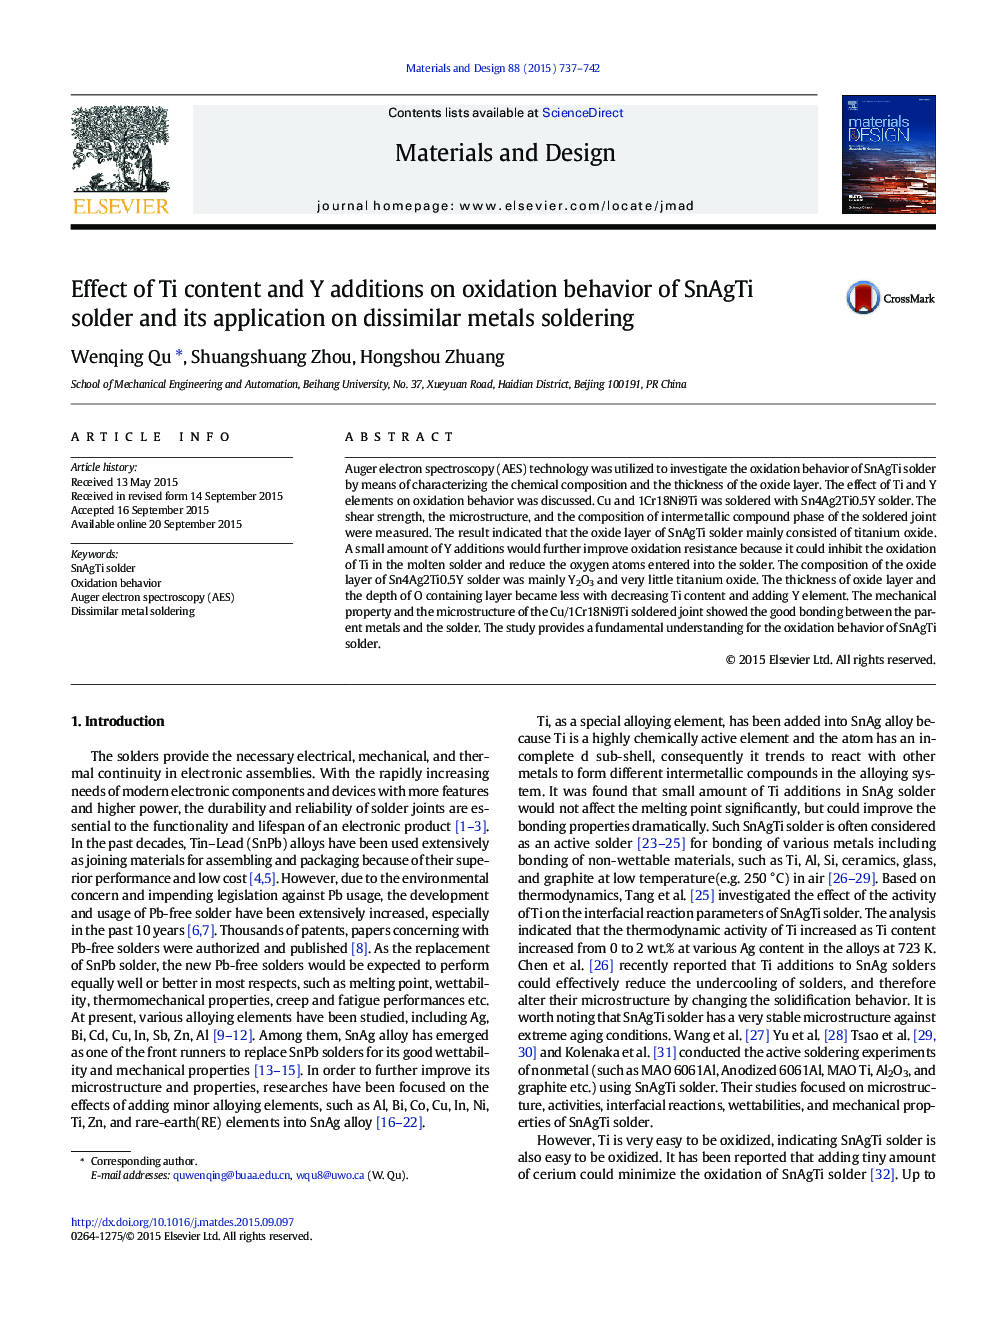 Effect of Ti content and Y additions on oxidation behavior of SnAgTi solder and its application on dissimilar metals soldering